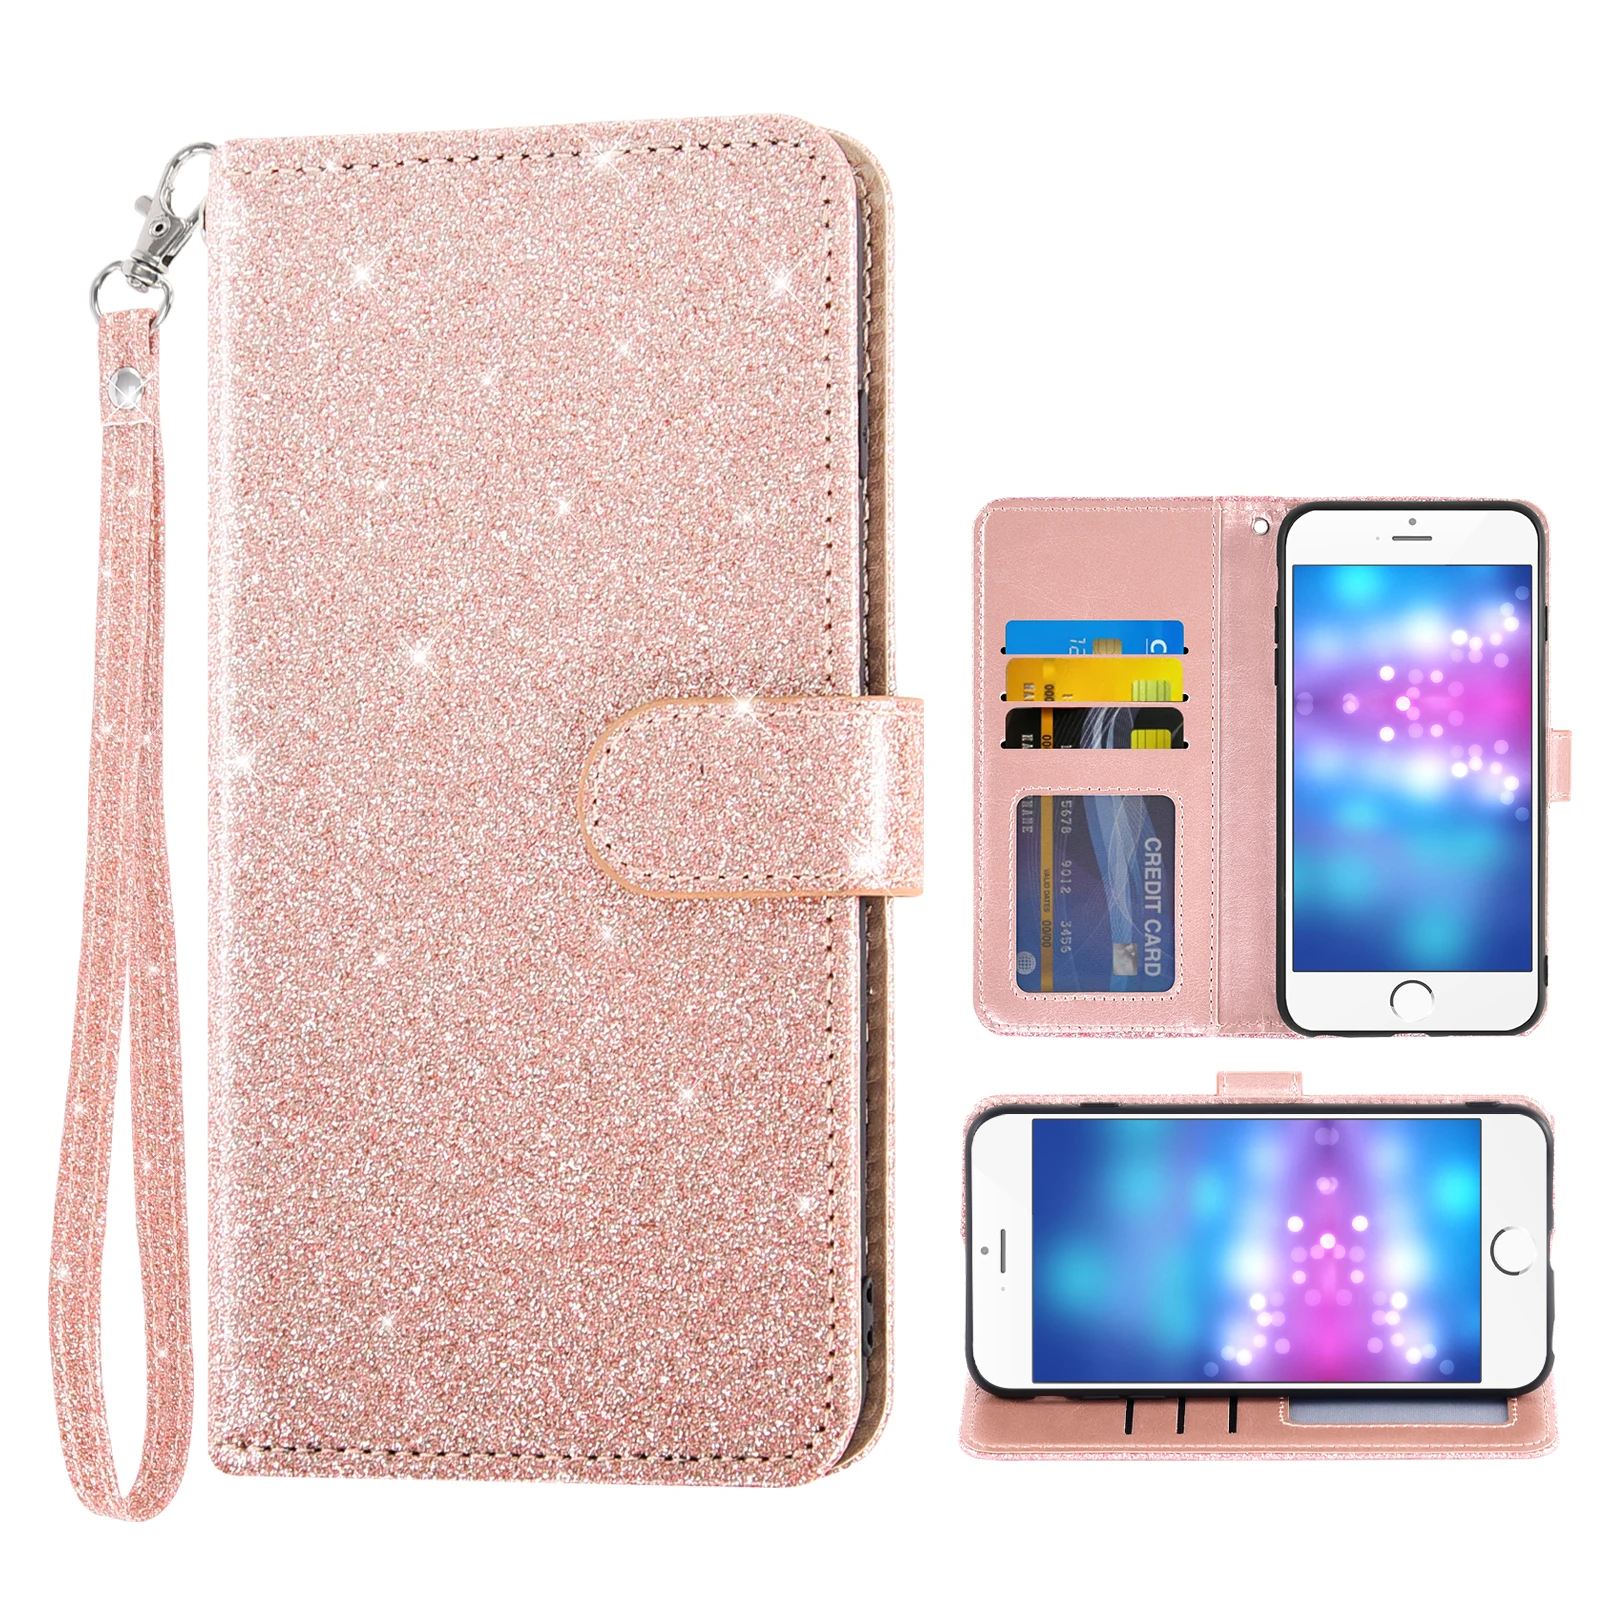 

Sequin Glitter Flip Cover Leather Wallet Phone Case For LG V20 V10 K51/Q51/Reflect K50/Q60/X6/K12 MAX K22 Q7/Q7 Plus/Style L-03K